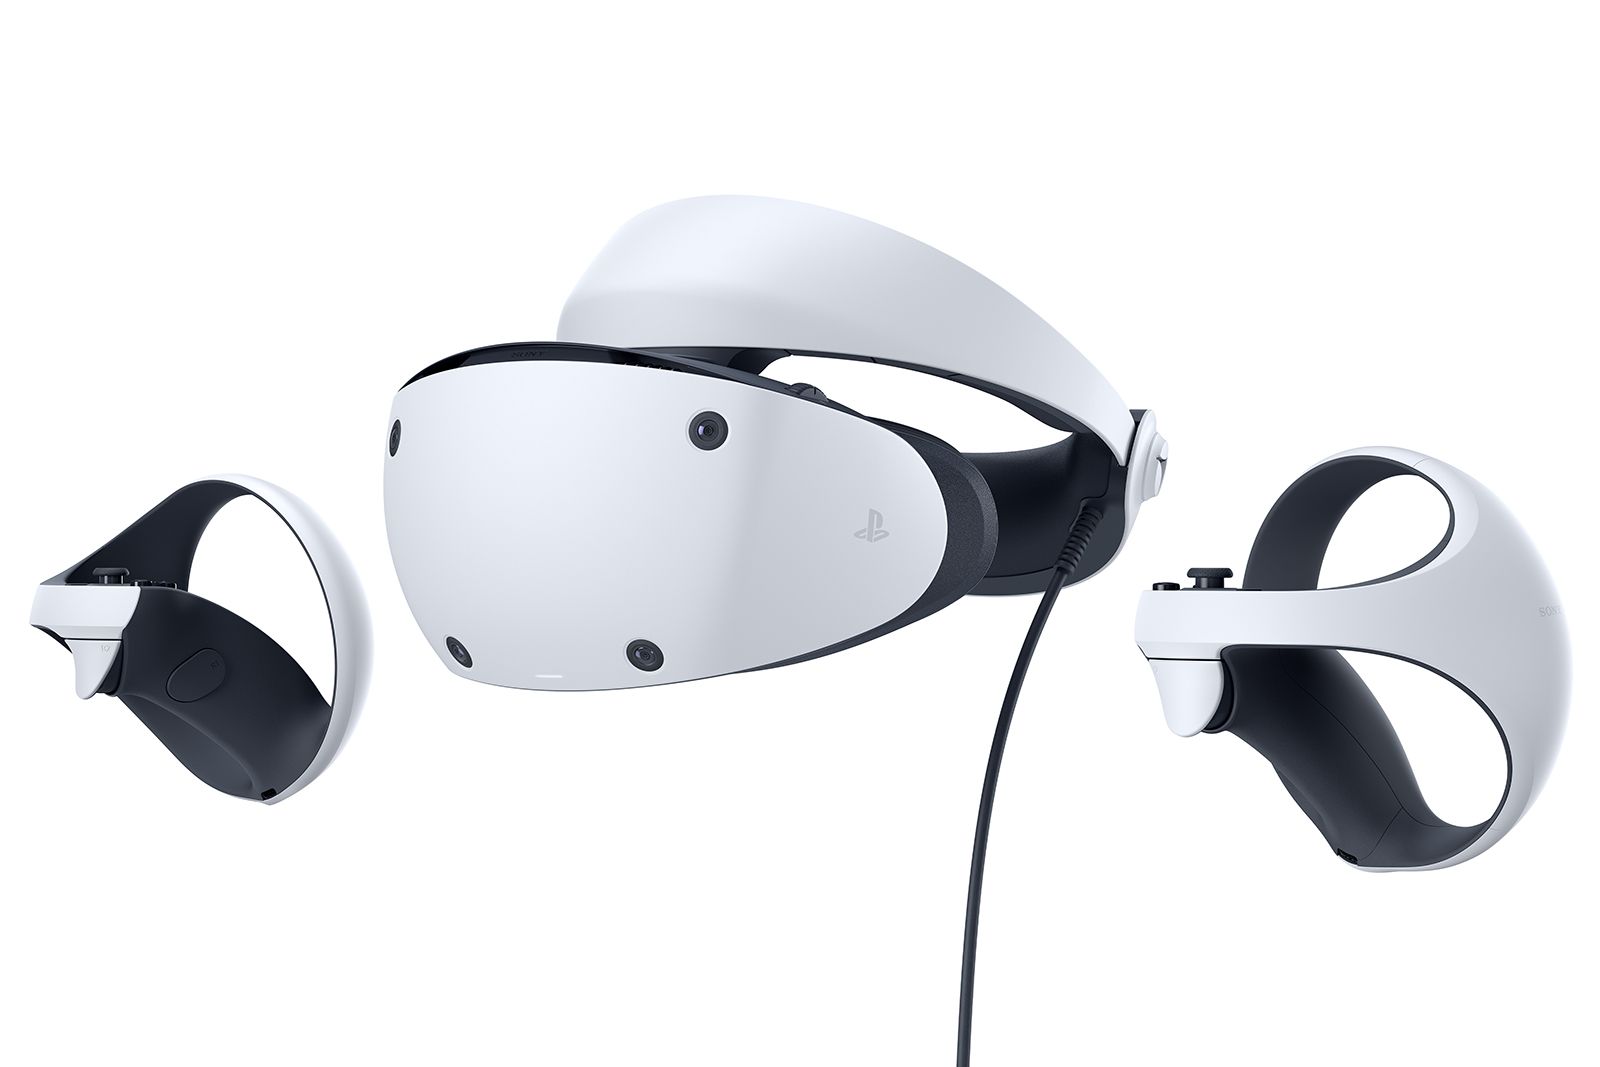 Sony PSVR2 reportedly being demonstrated at GDC 2022 photo 2